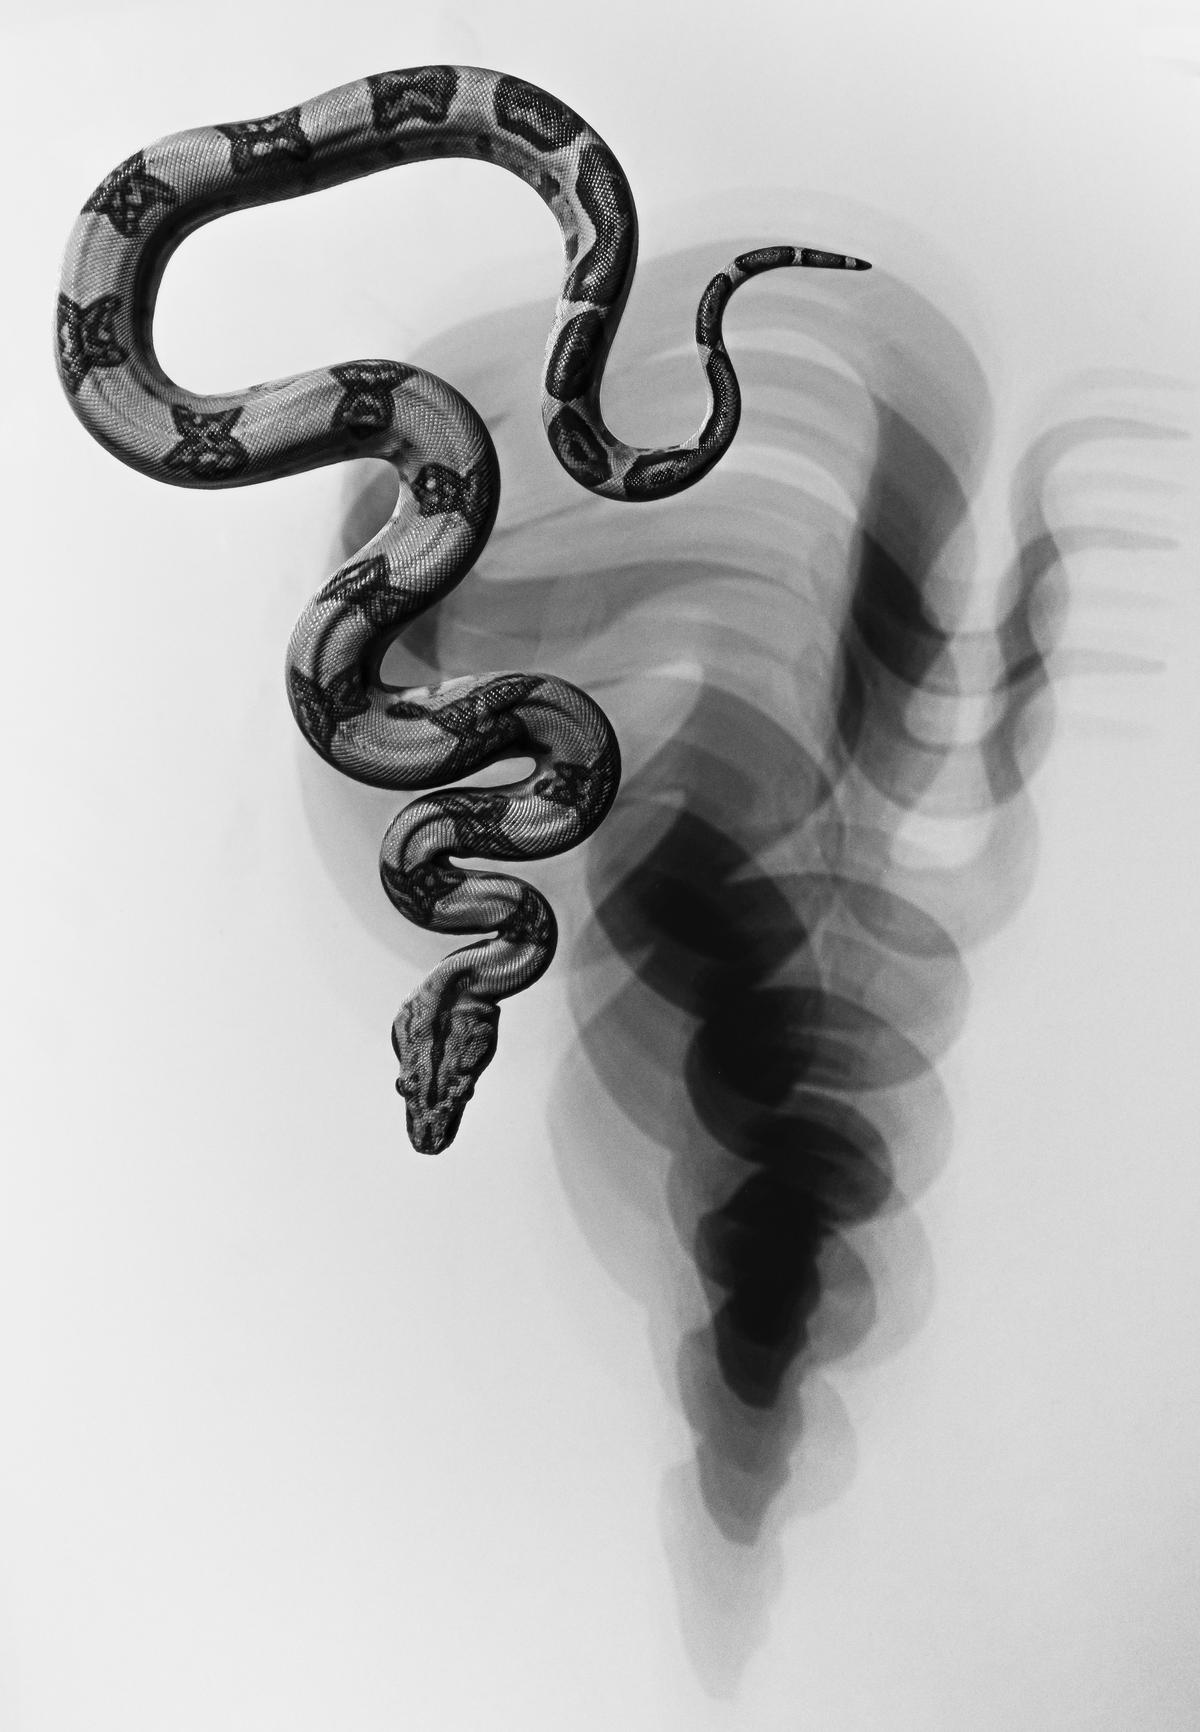 Image of a black snake in a dream, symbolizing different interpretations in various cultures